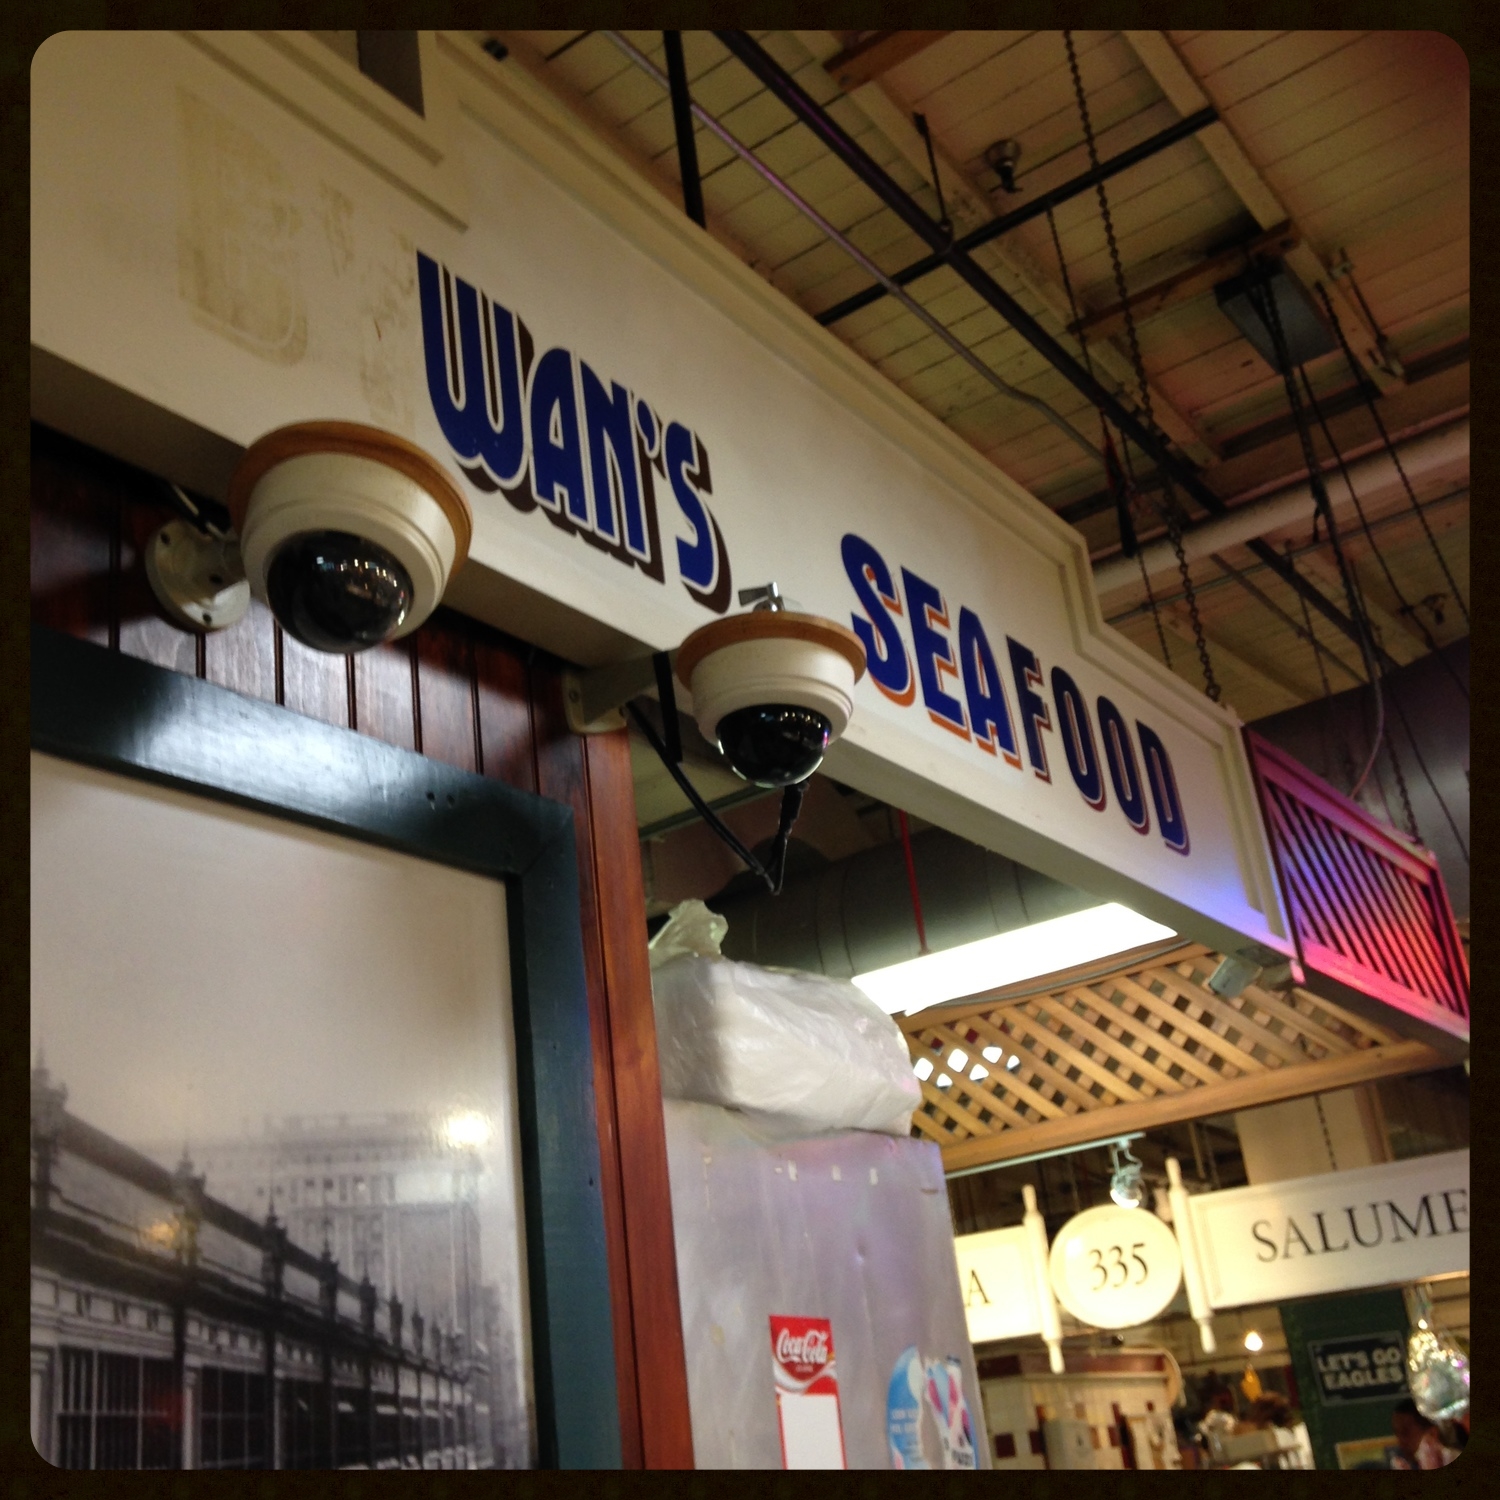 Wan's Seafood at the Reading Terminal 